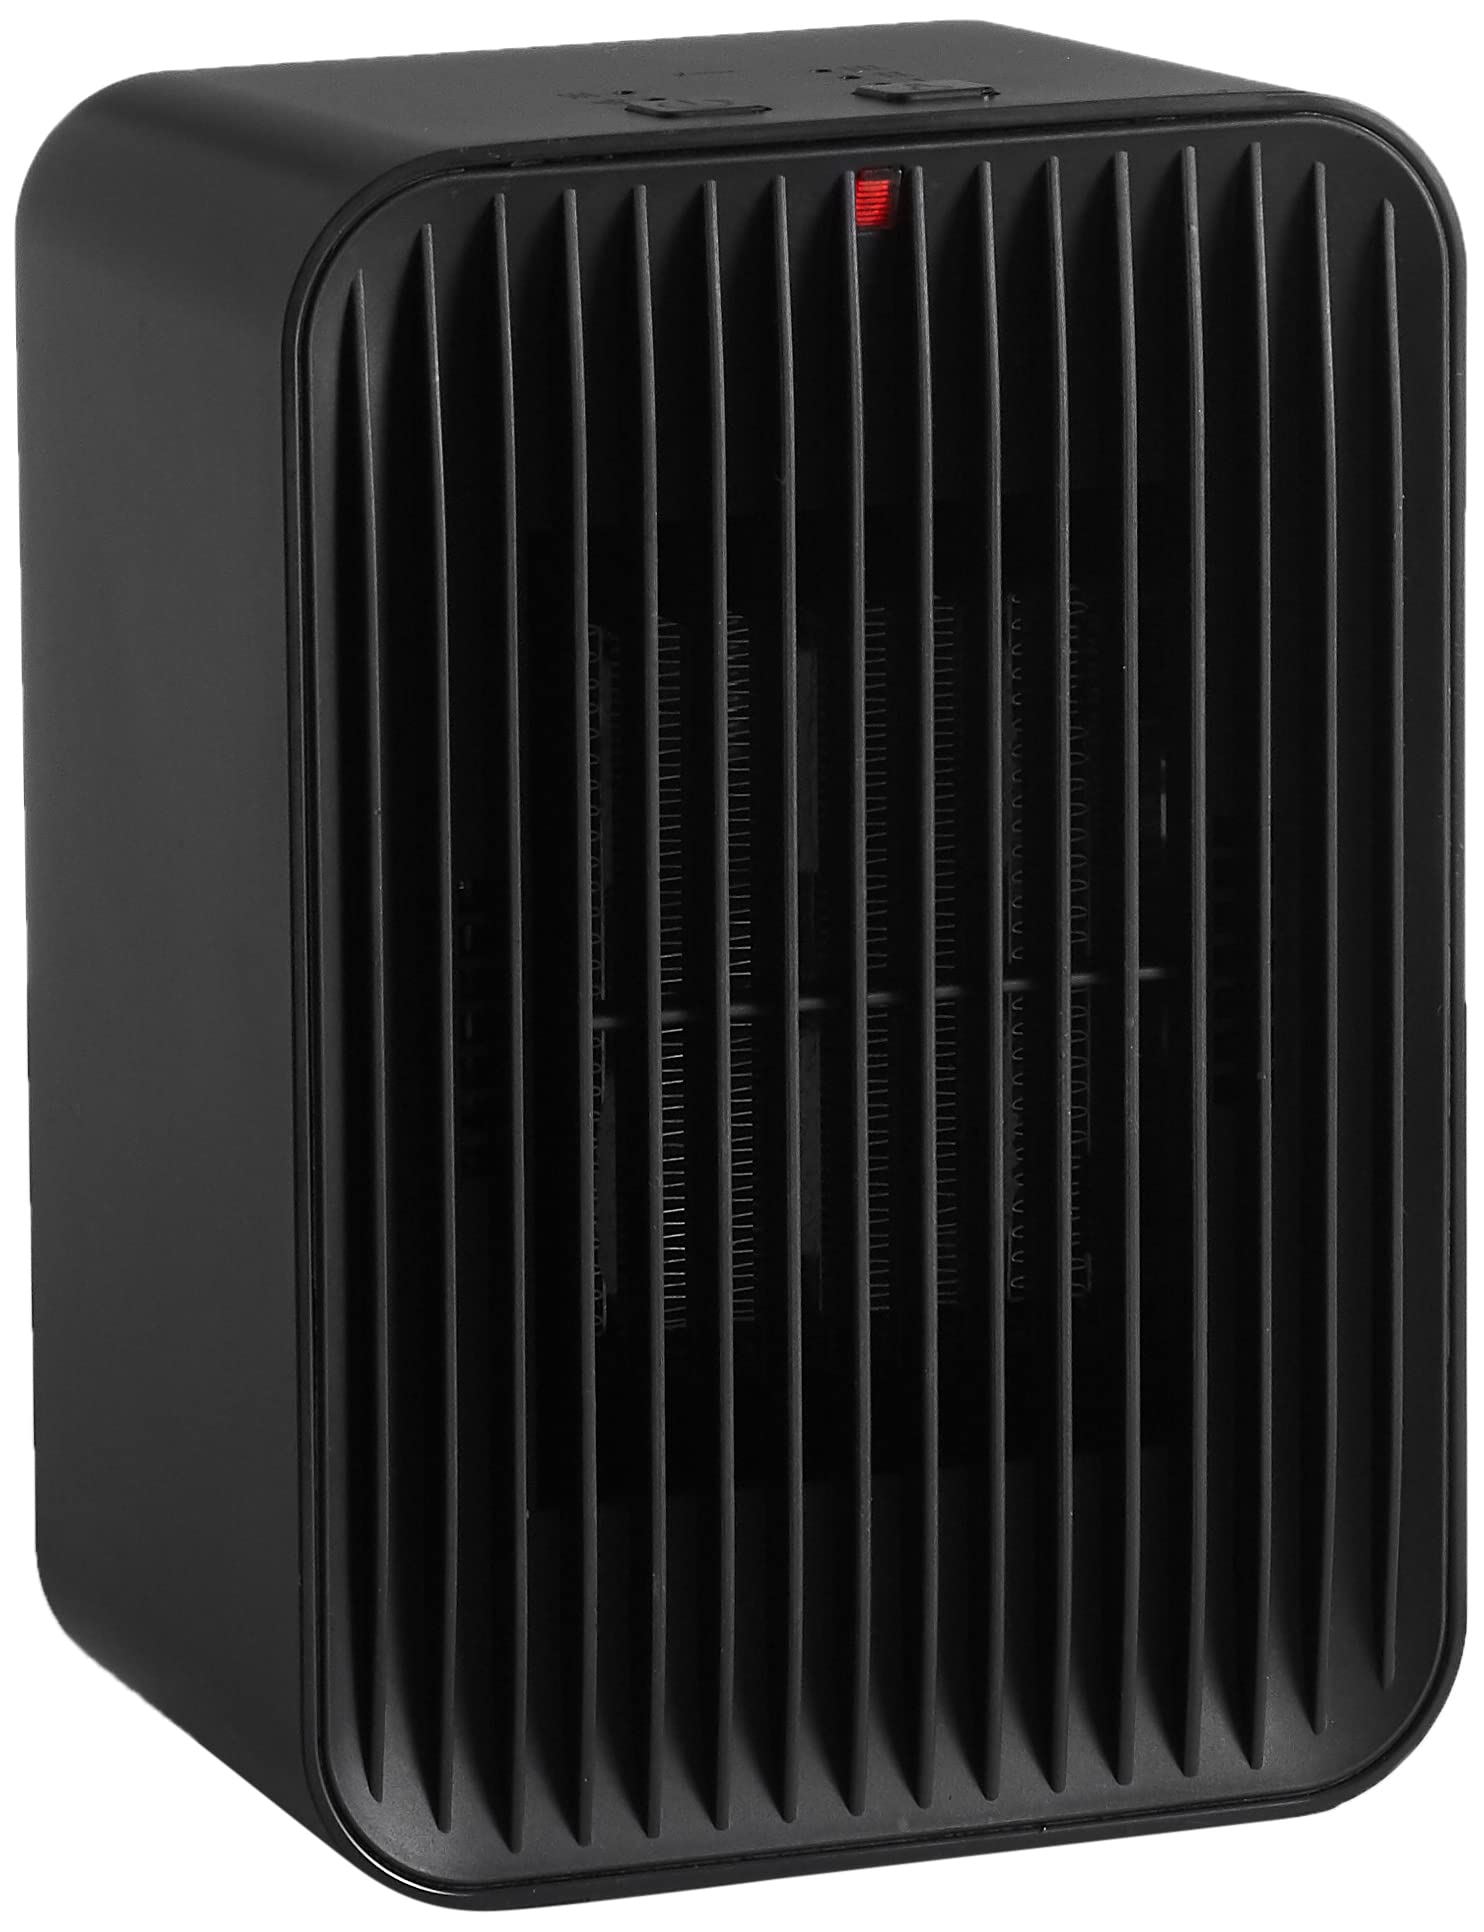 Amazon Basics DQ2088 Electric Space Heater with Temperature Control (Black, 520 Watt) $15.75 + Free Shipping w/ Prime or on $35+